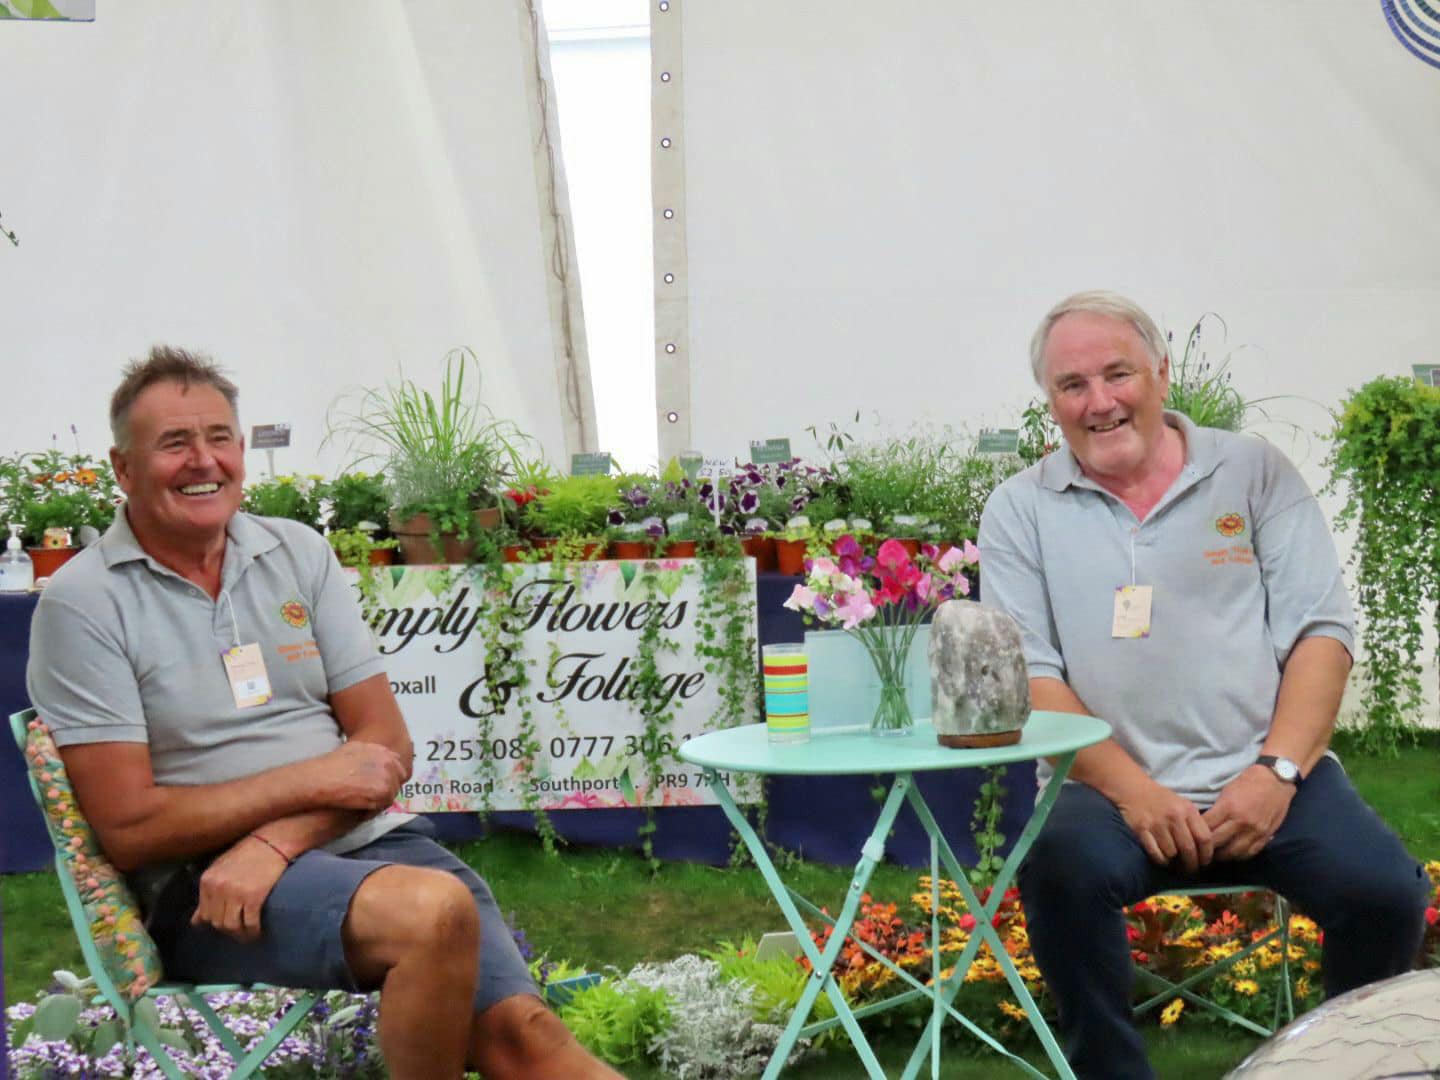 Simply Flowers & Foliage, with gardener Alan Foxall (right), at Southport Flower Show. Alan has been exhibiting at the Show for 55 years, since 1967. Photo by Andrew Brown Media